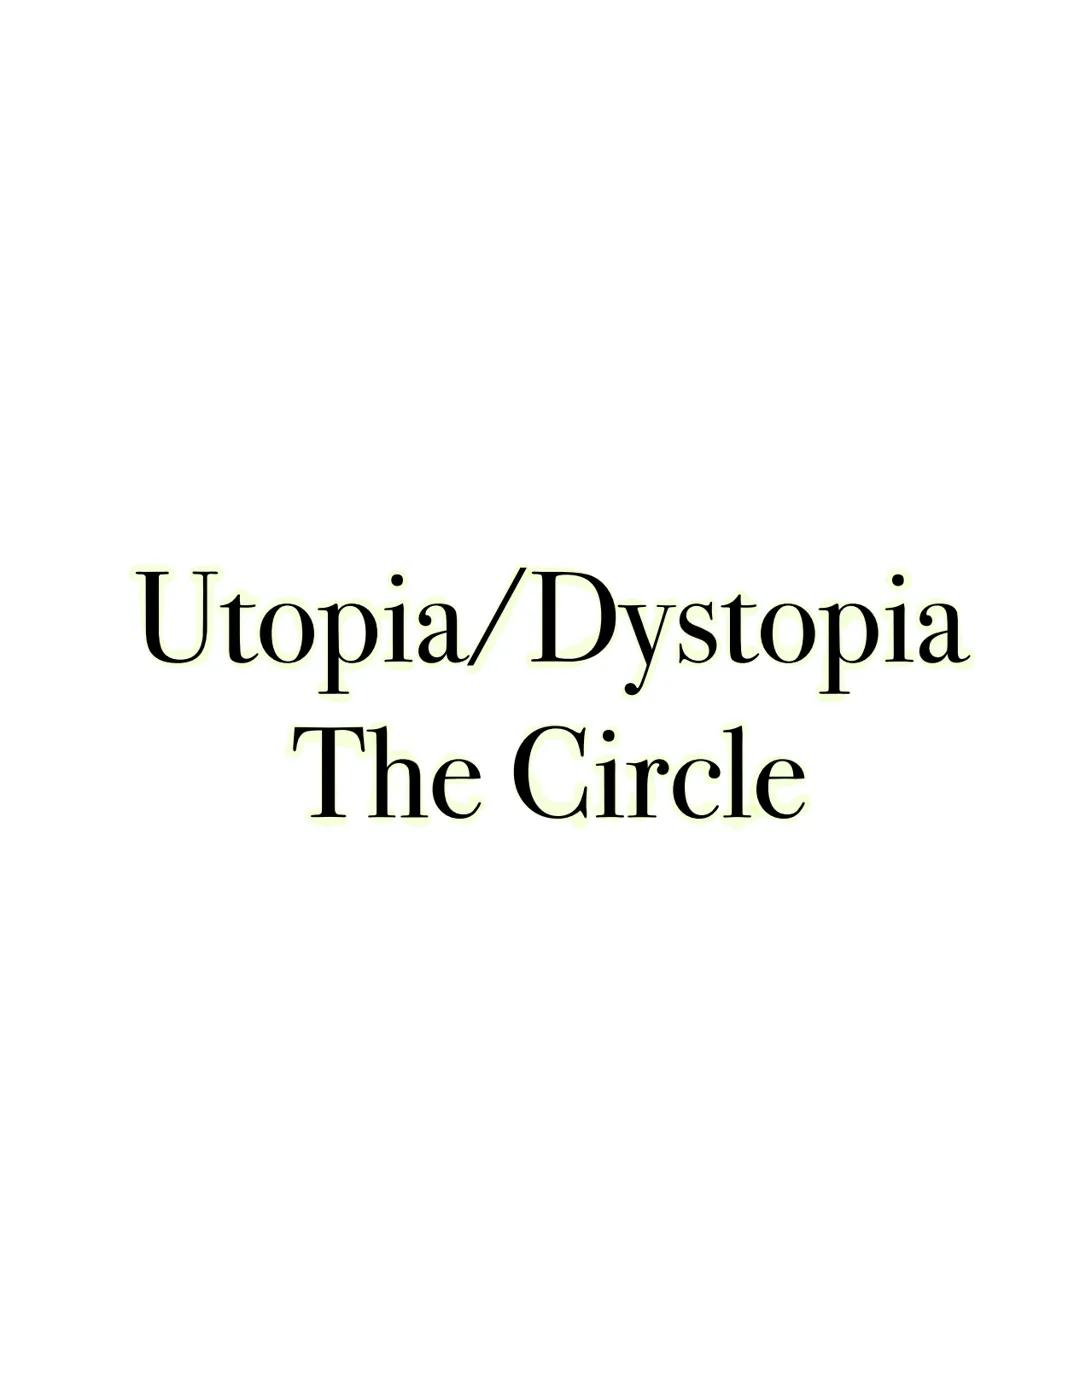 Utopia/Dystopia
The Circle Utopia
A utopia is a perfect world. In utopias, there are not problems like war, disease, poverty, oppression,
di